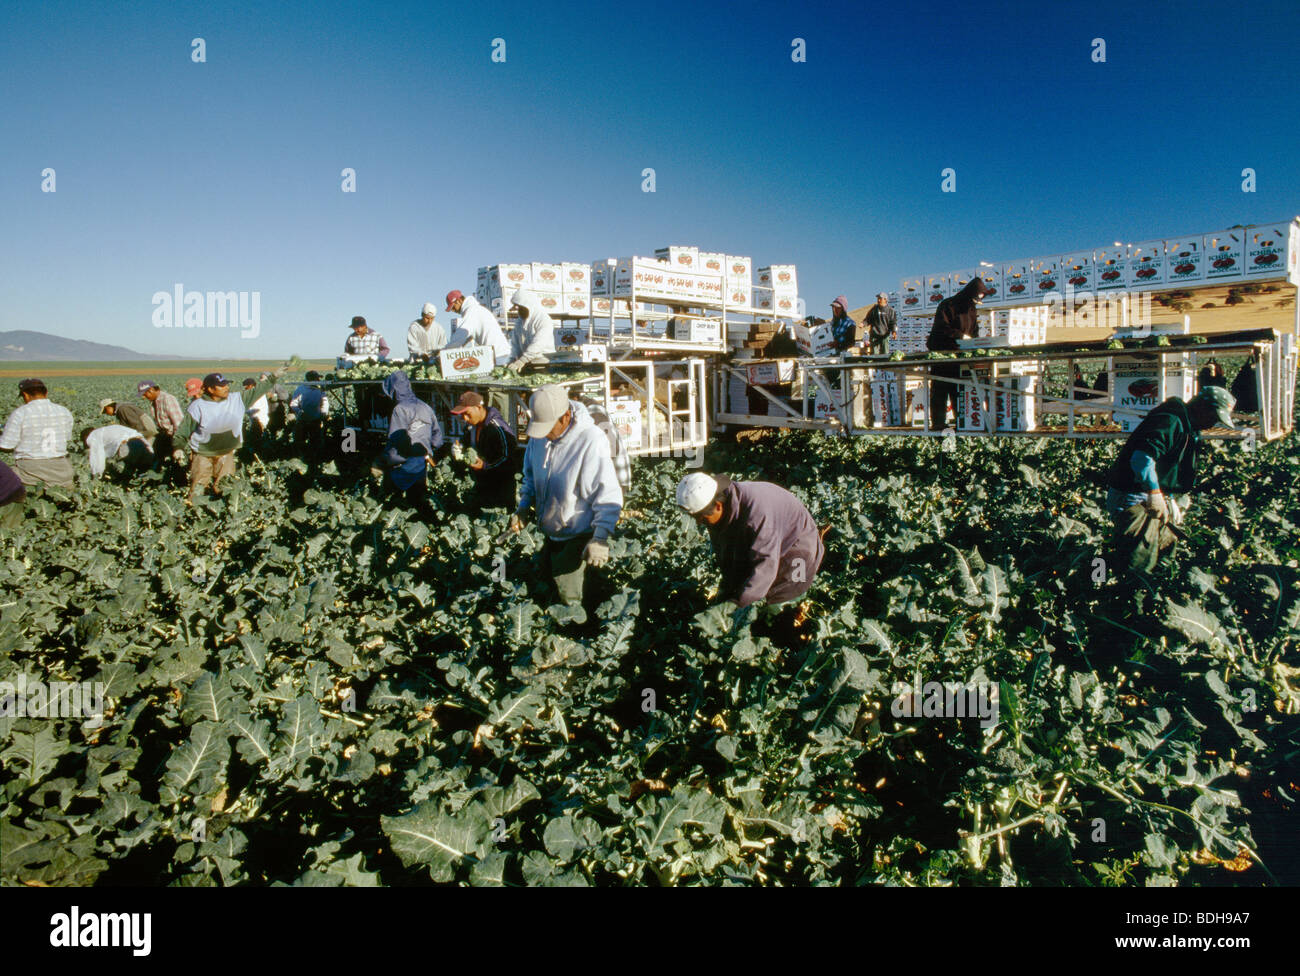 Agriculture - A field crew and equipment harvesting broccoli / Salinas Valley, California, USA. Stock Photo